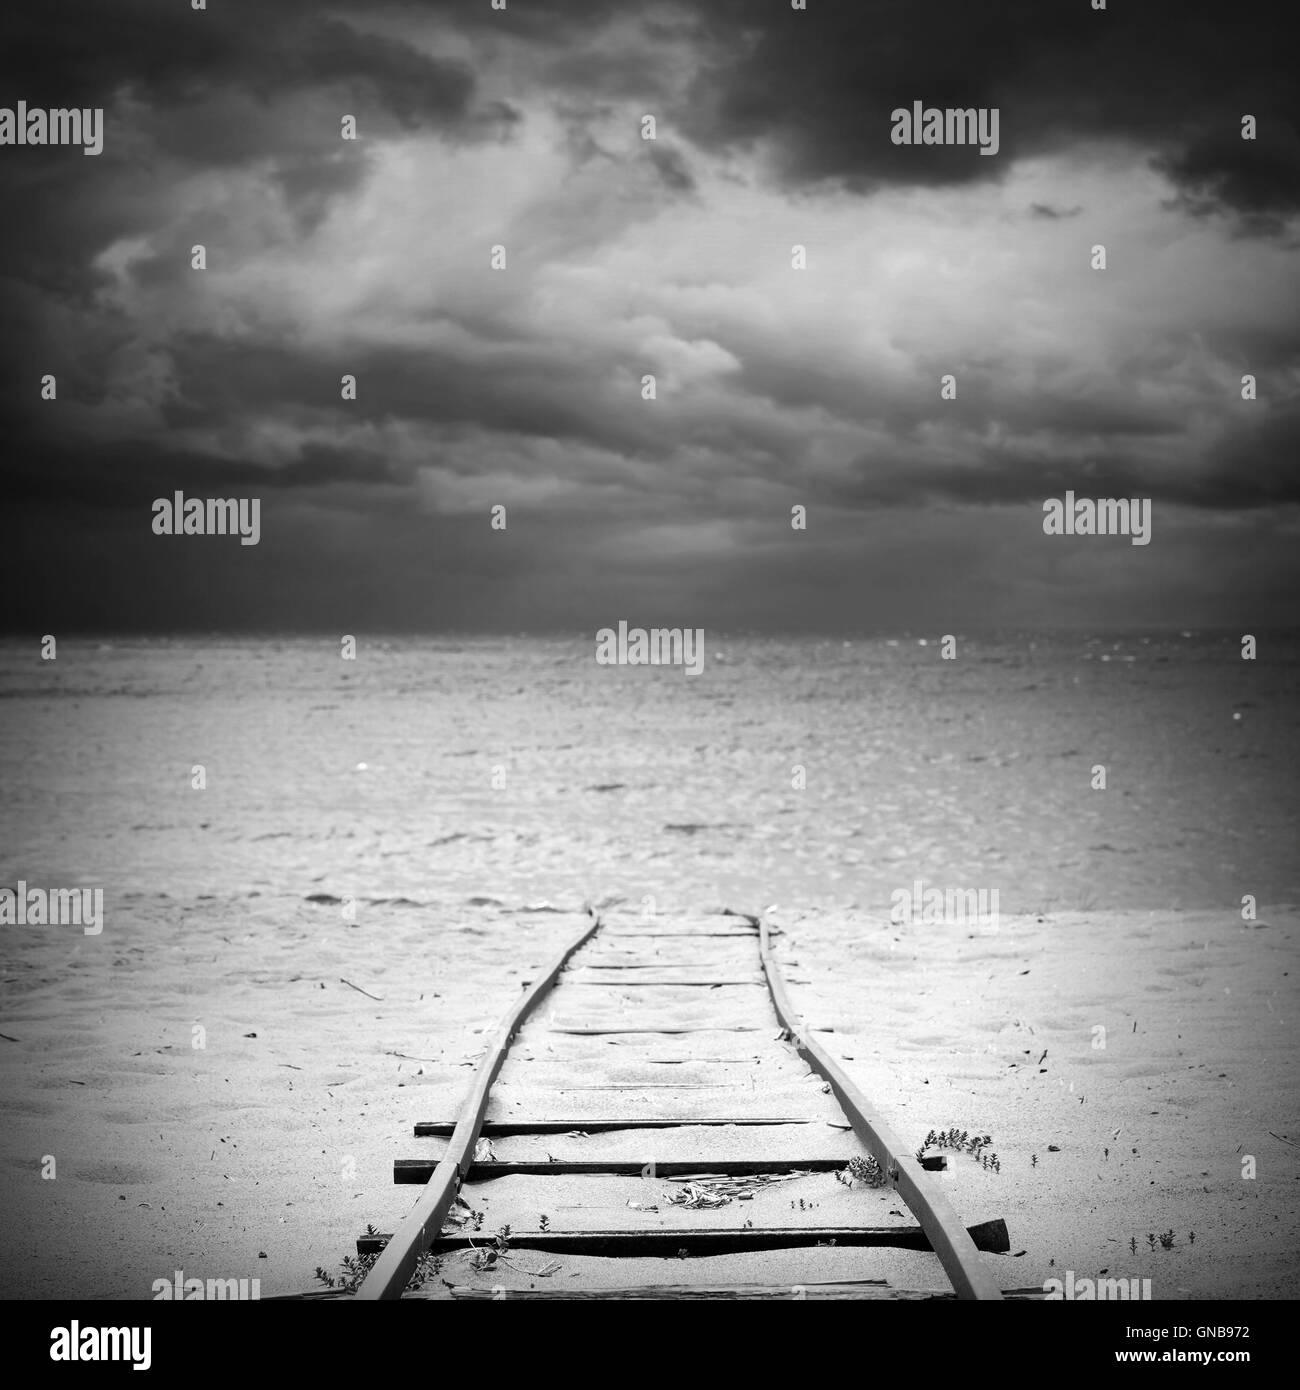 Old railway goes over sandy beach to sea water under dark dramatic cloudy sky, useful for boat launching. Square black and white Stock Photo